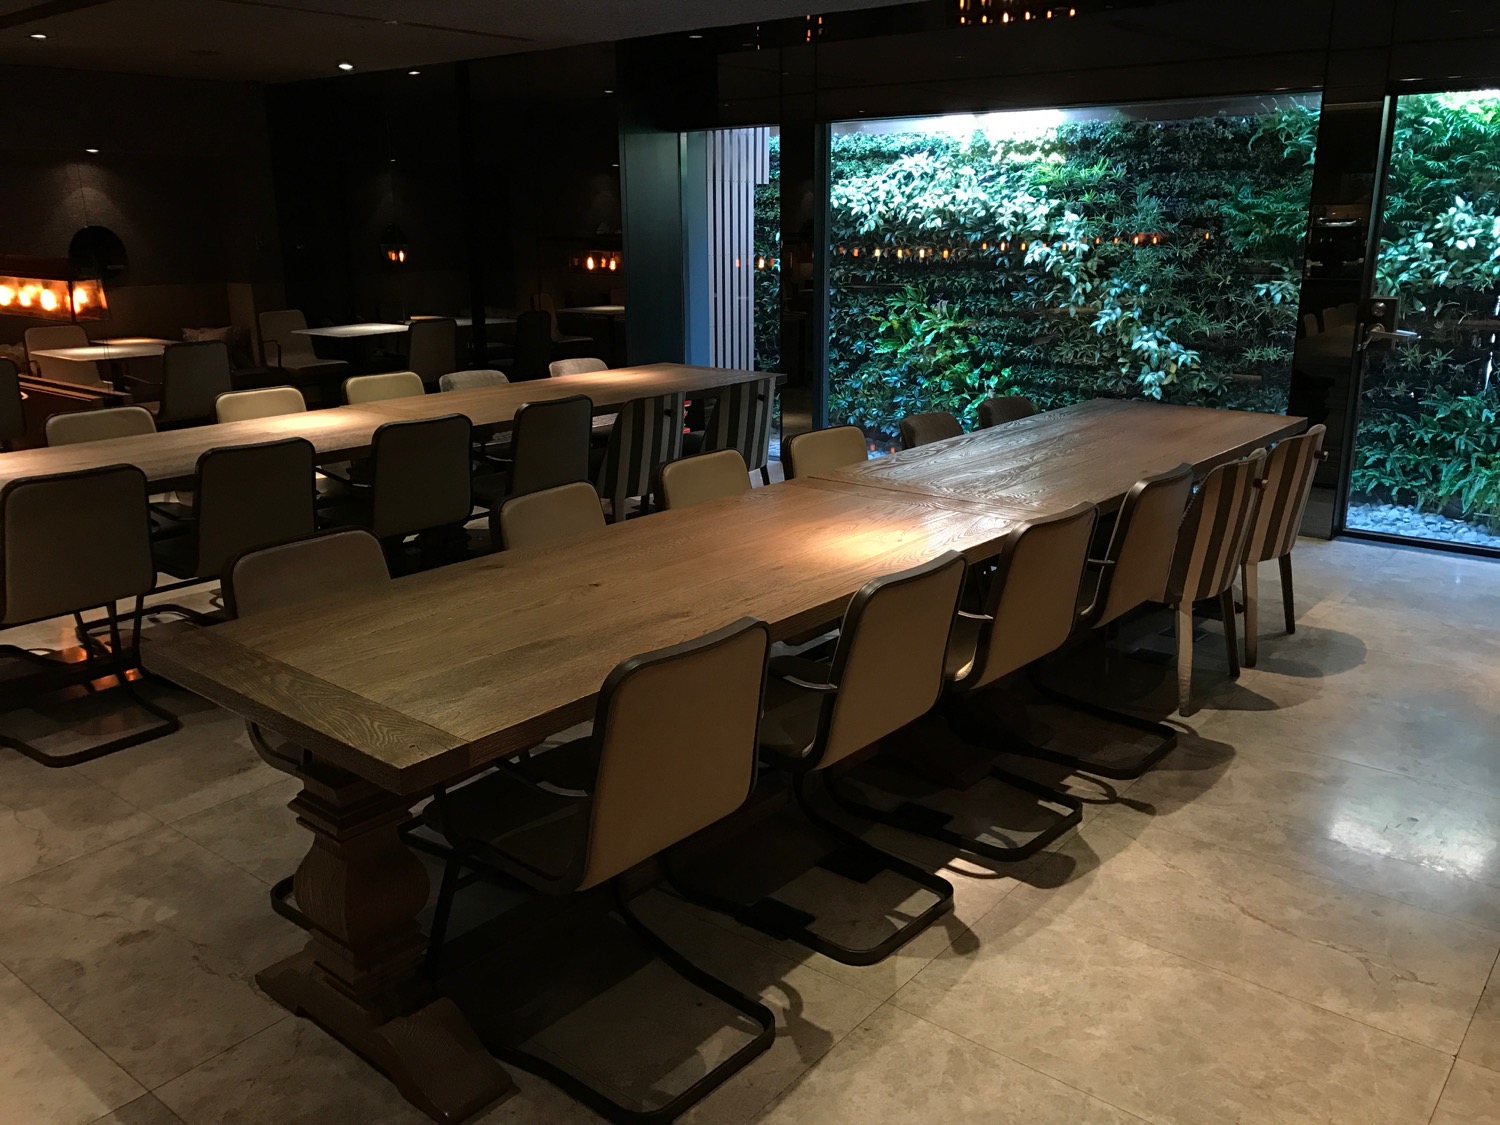 China Airlines TPE Business Lounge - 5